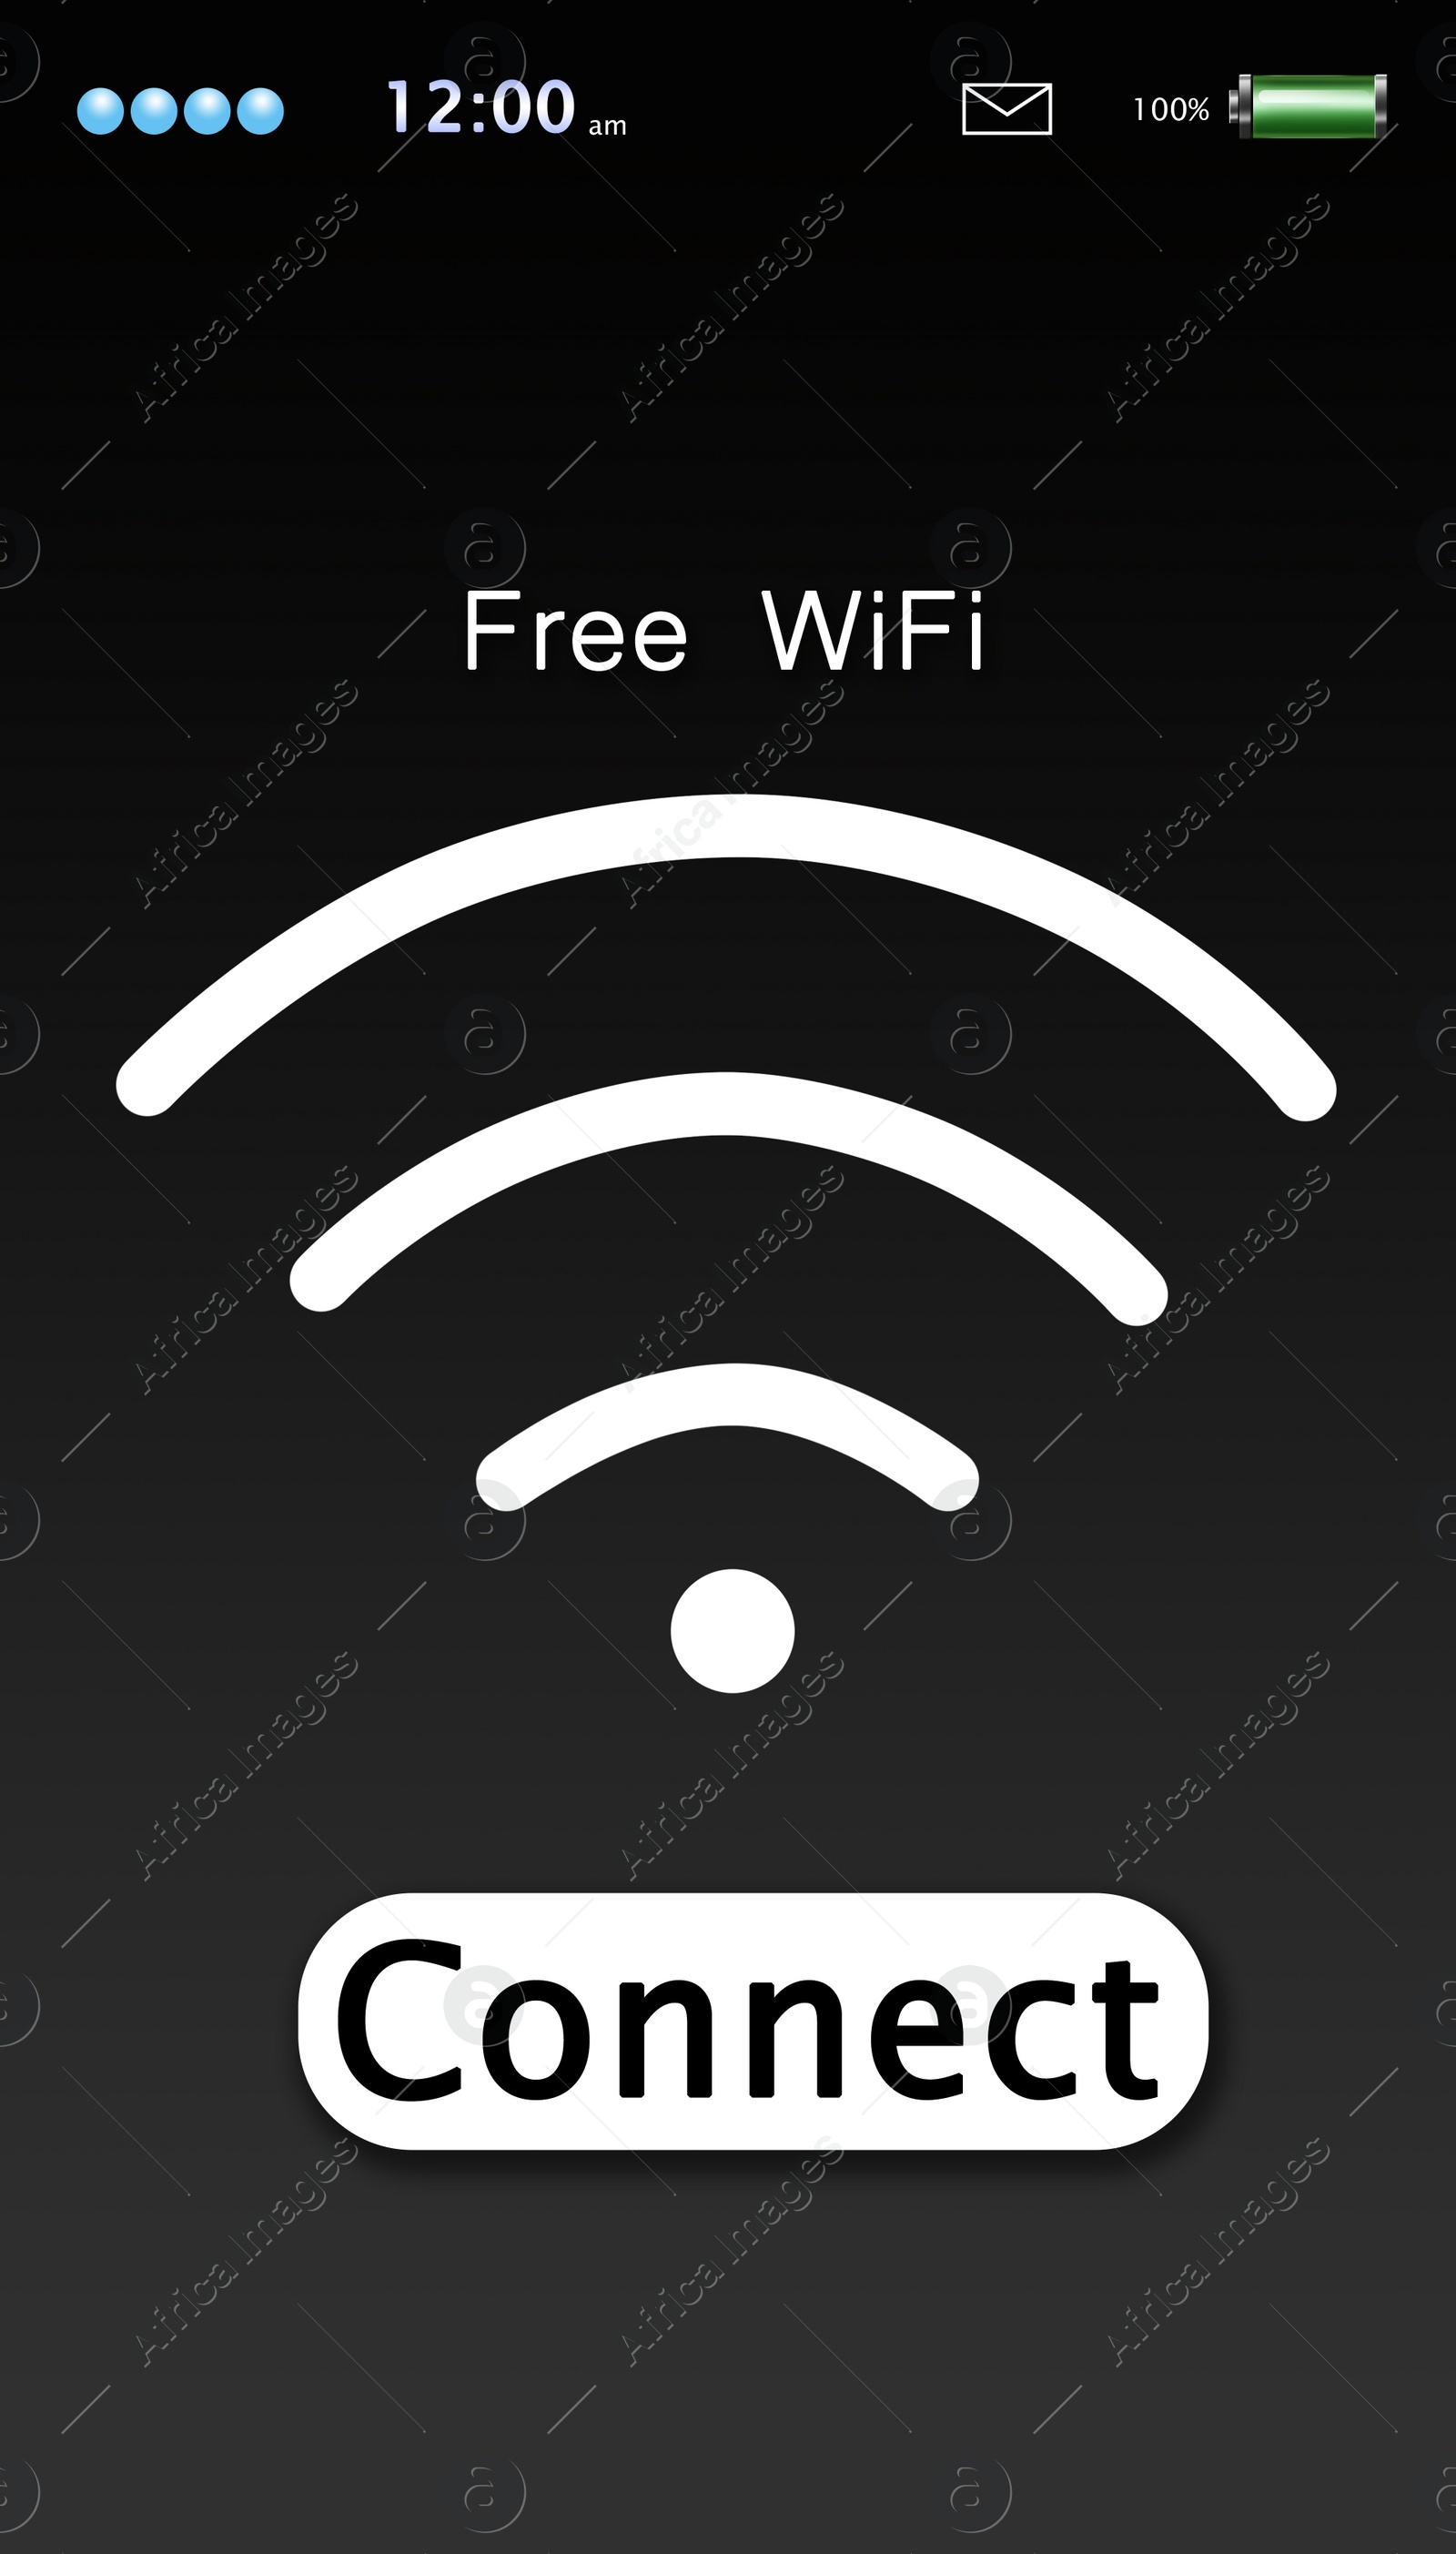 Illustration of Free WiFi. Gadget display with text and symbol, illustration design